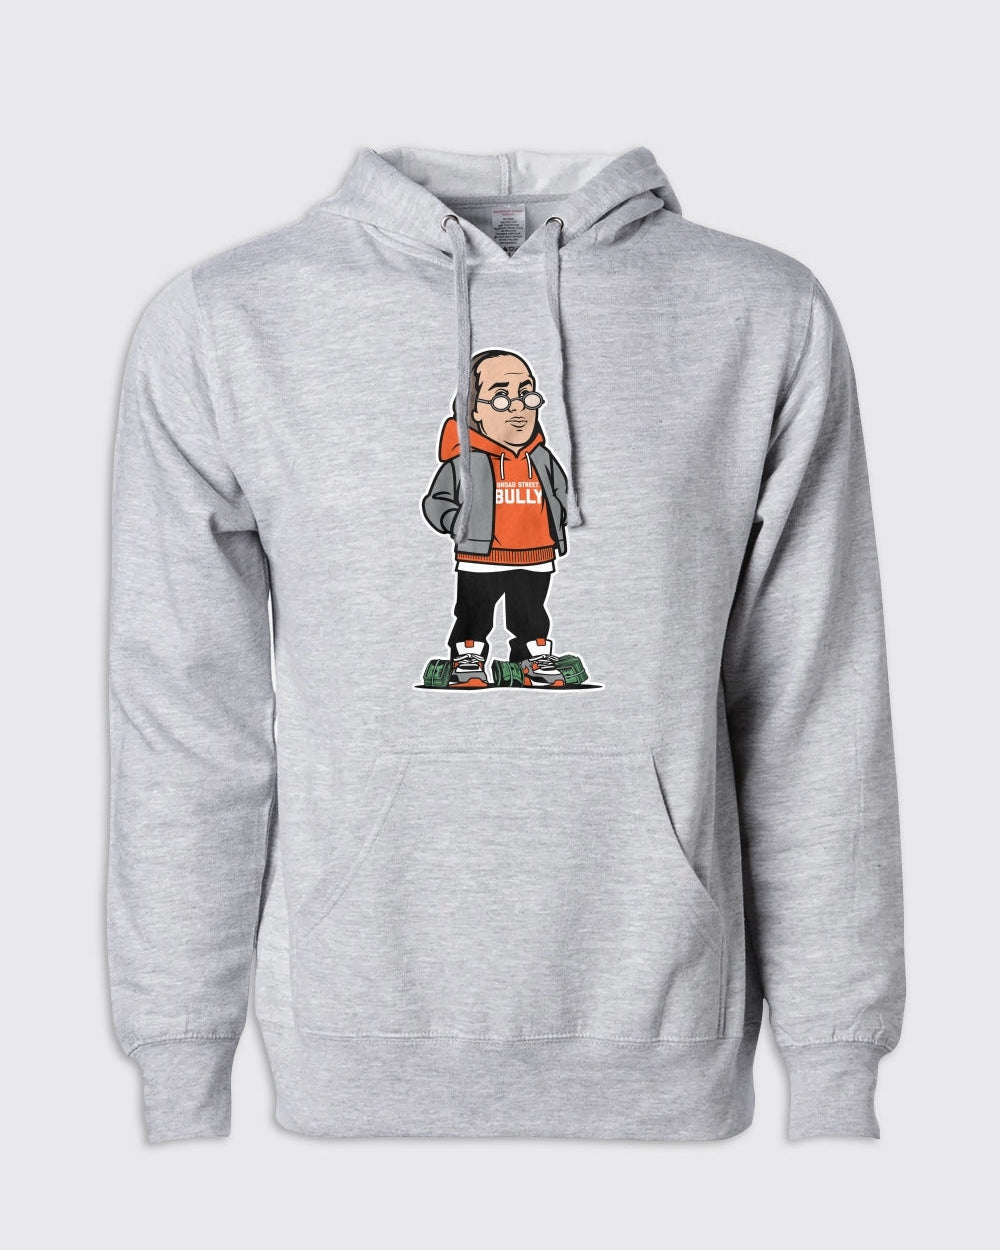 Ben Franklin Flyers Hoodie - Flyers, Hoodies - Philly Sports Shirts